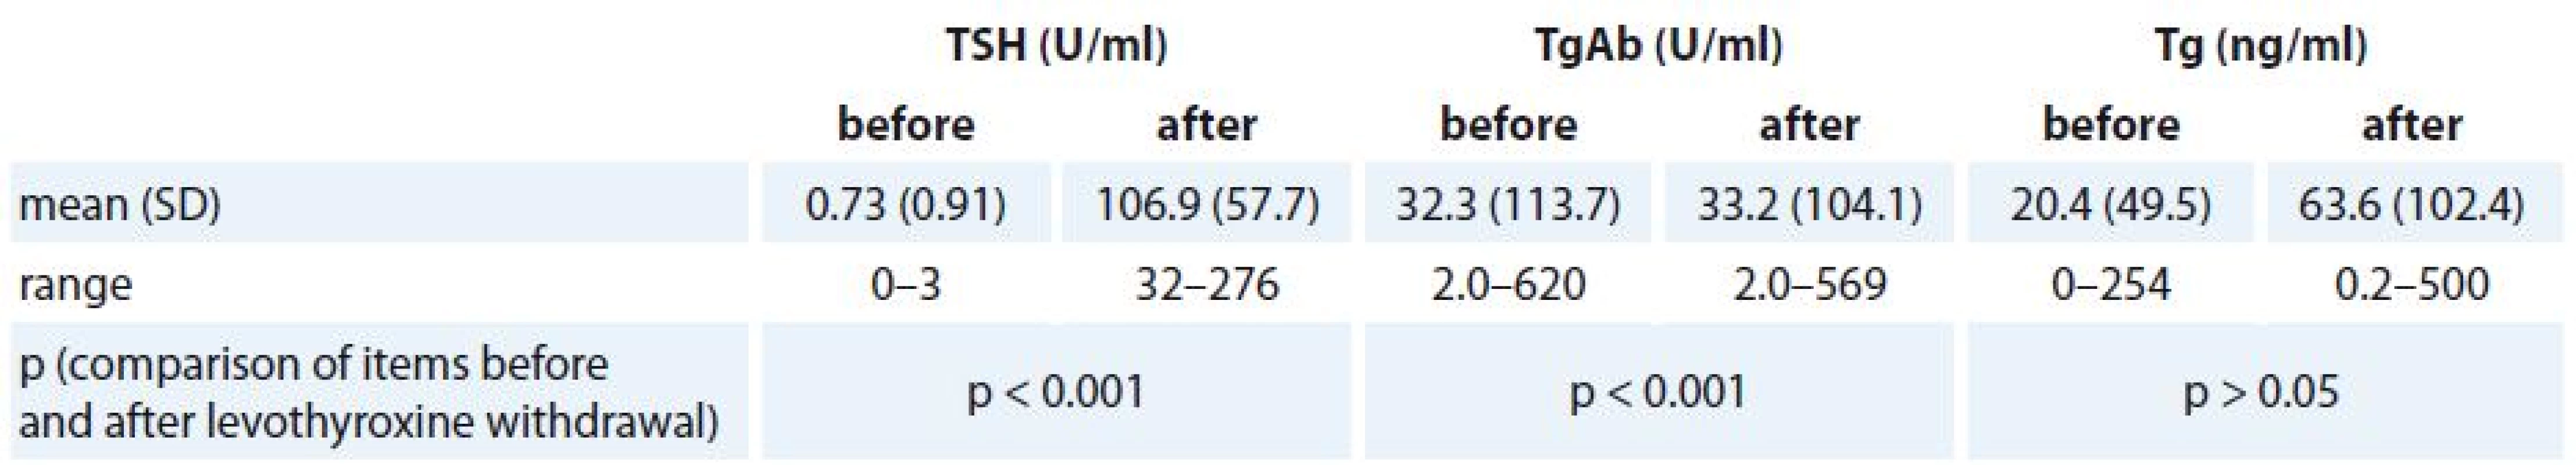 Result from blood tests in patients before and after levothyroxine withdrawal.